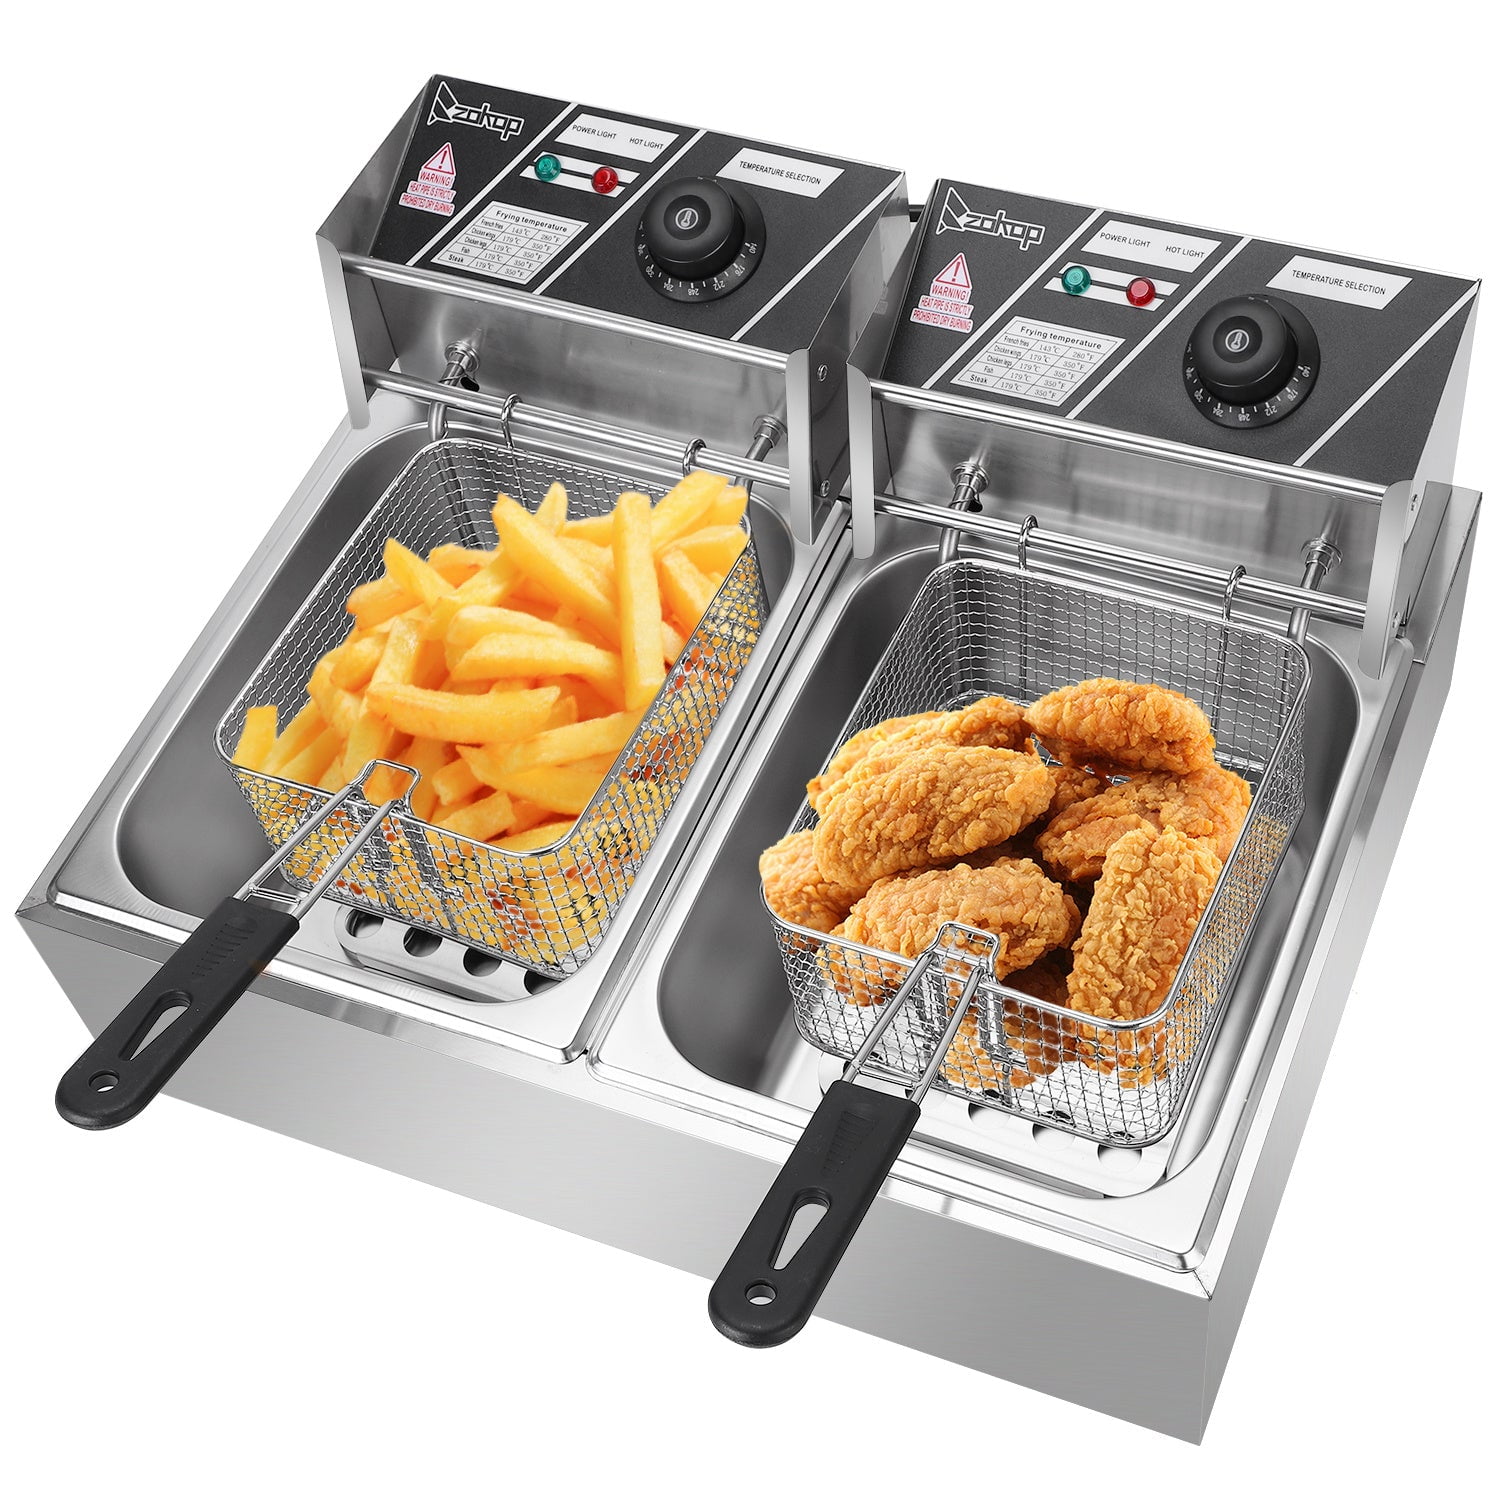 Deep Fryer 12.7QT/12L Stainless Steel Double Cylinder Electric Fryer with  Baskets Filters,Electric Fryer for Turkey,French Fries,Donuts